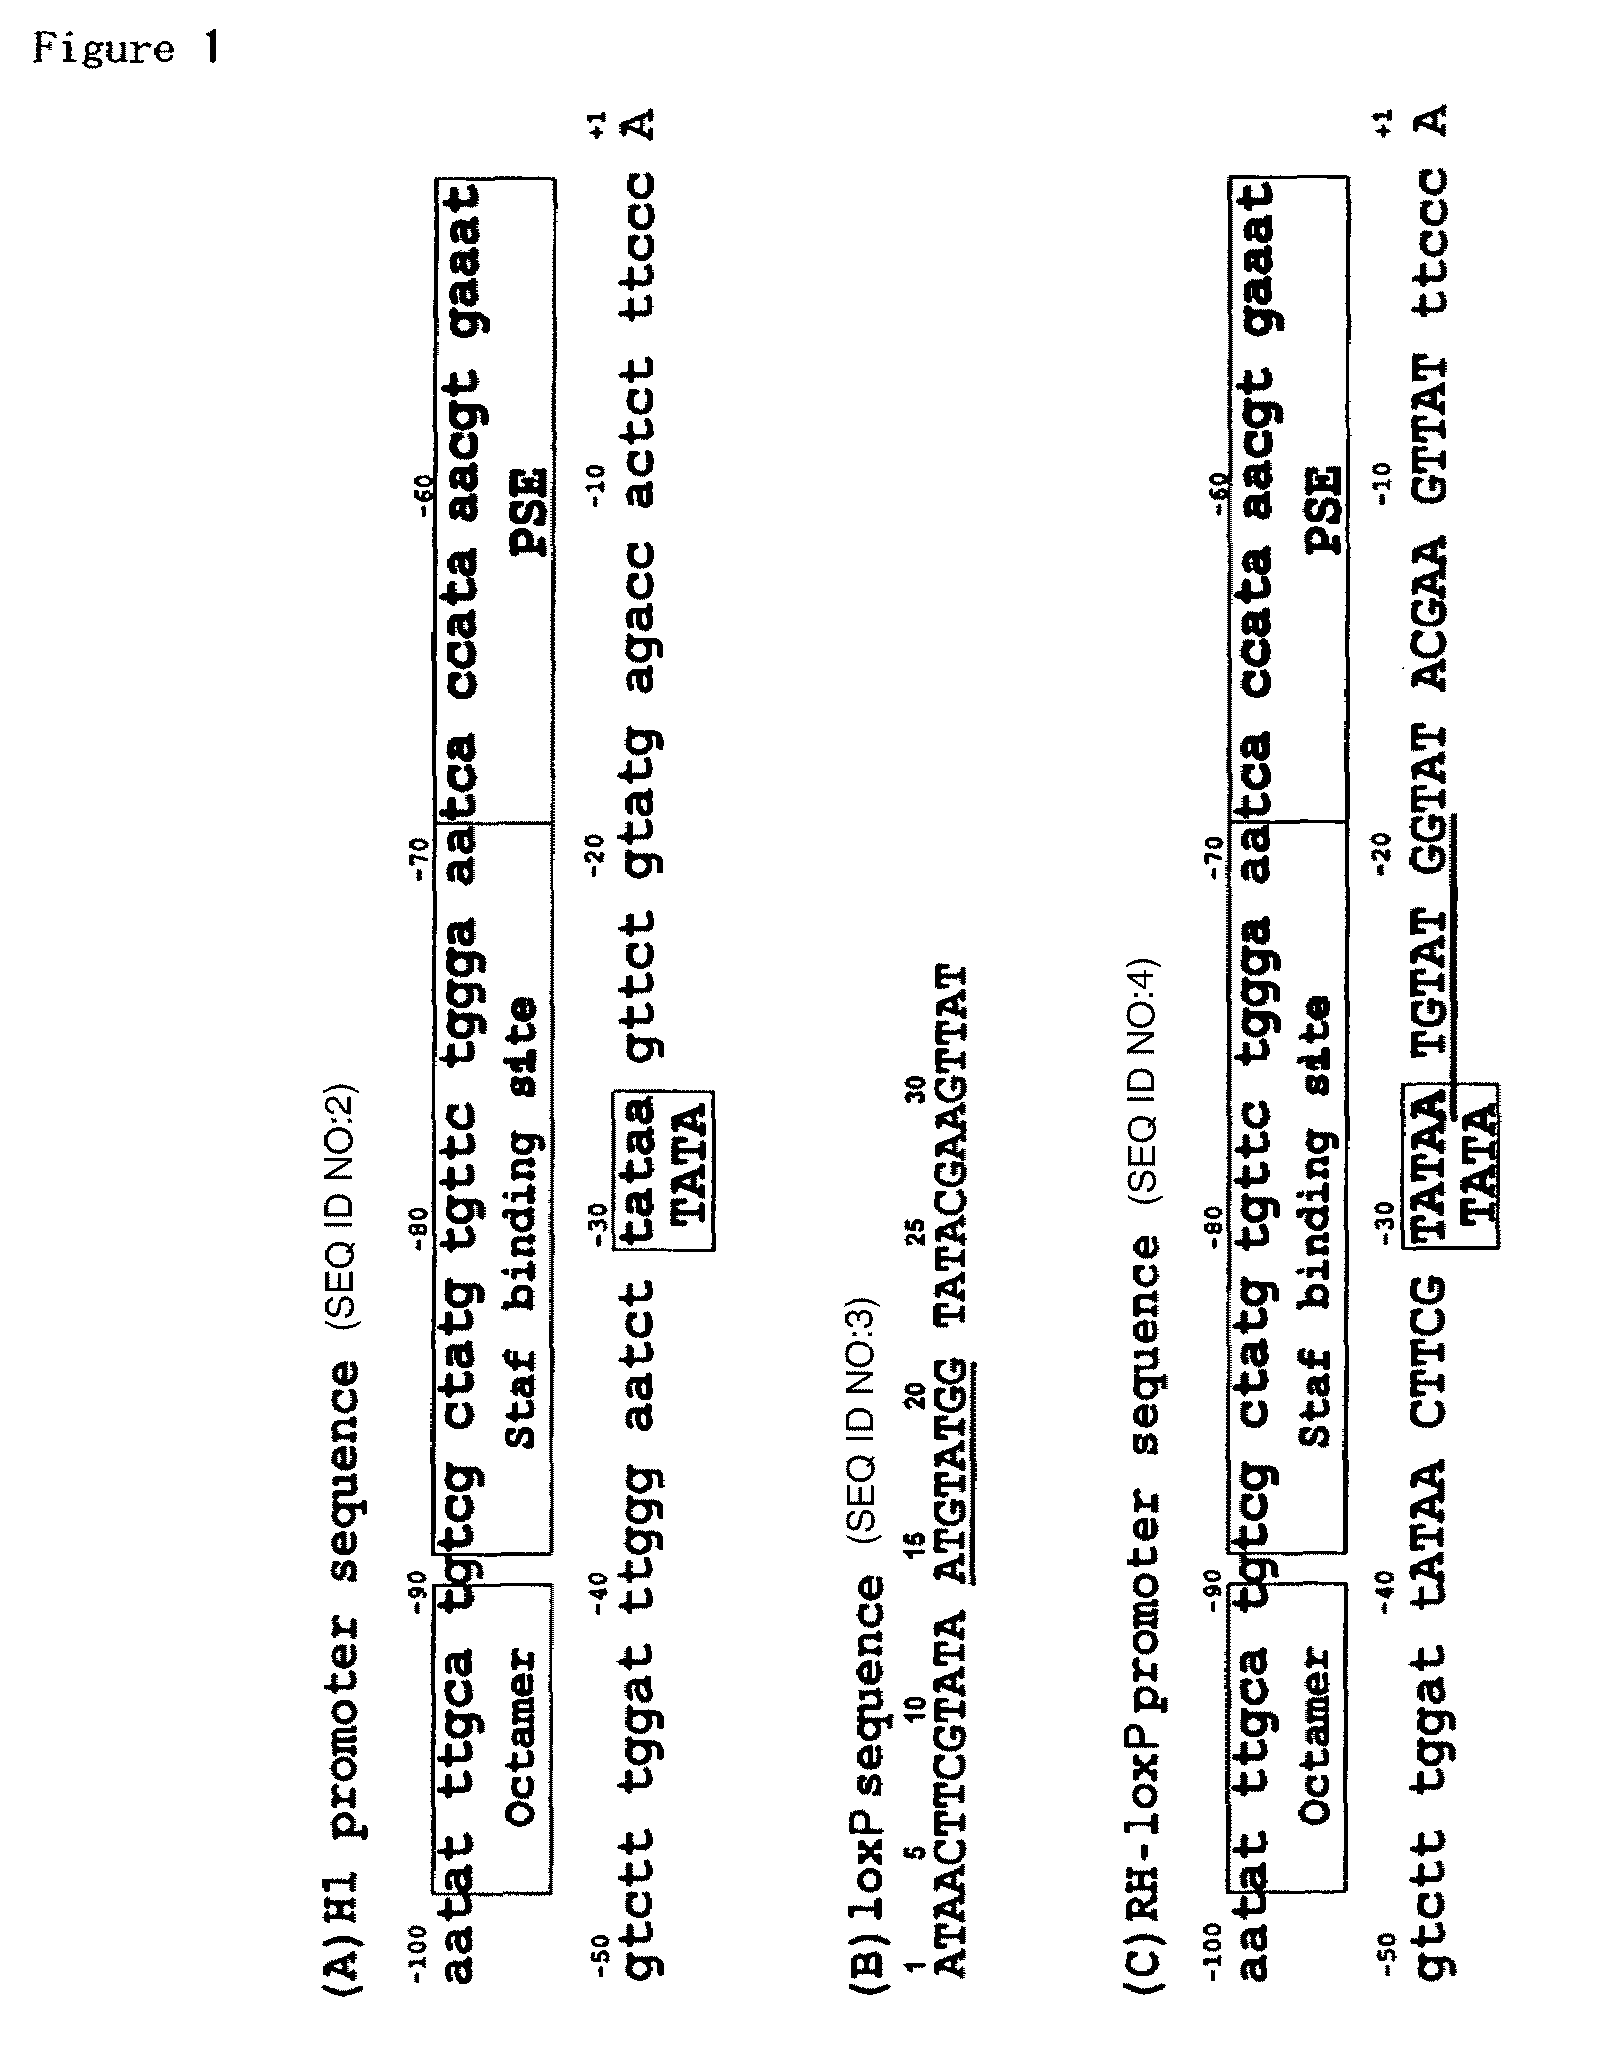 RNA polymerase III promoter, process for producing the same and method of using the same